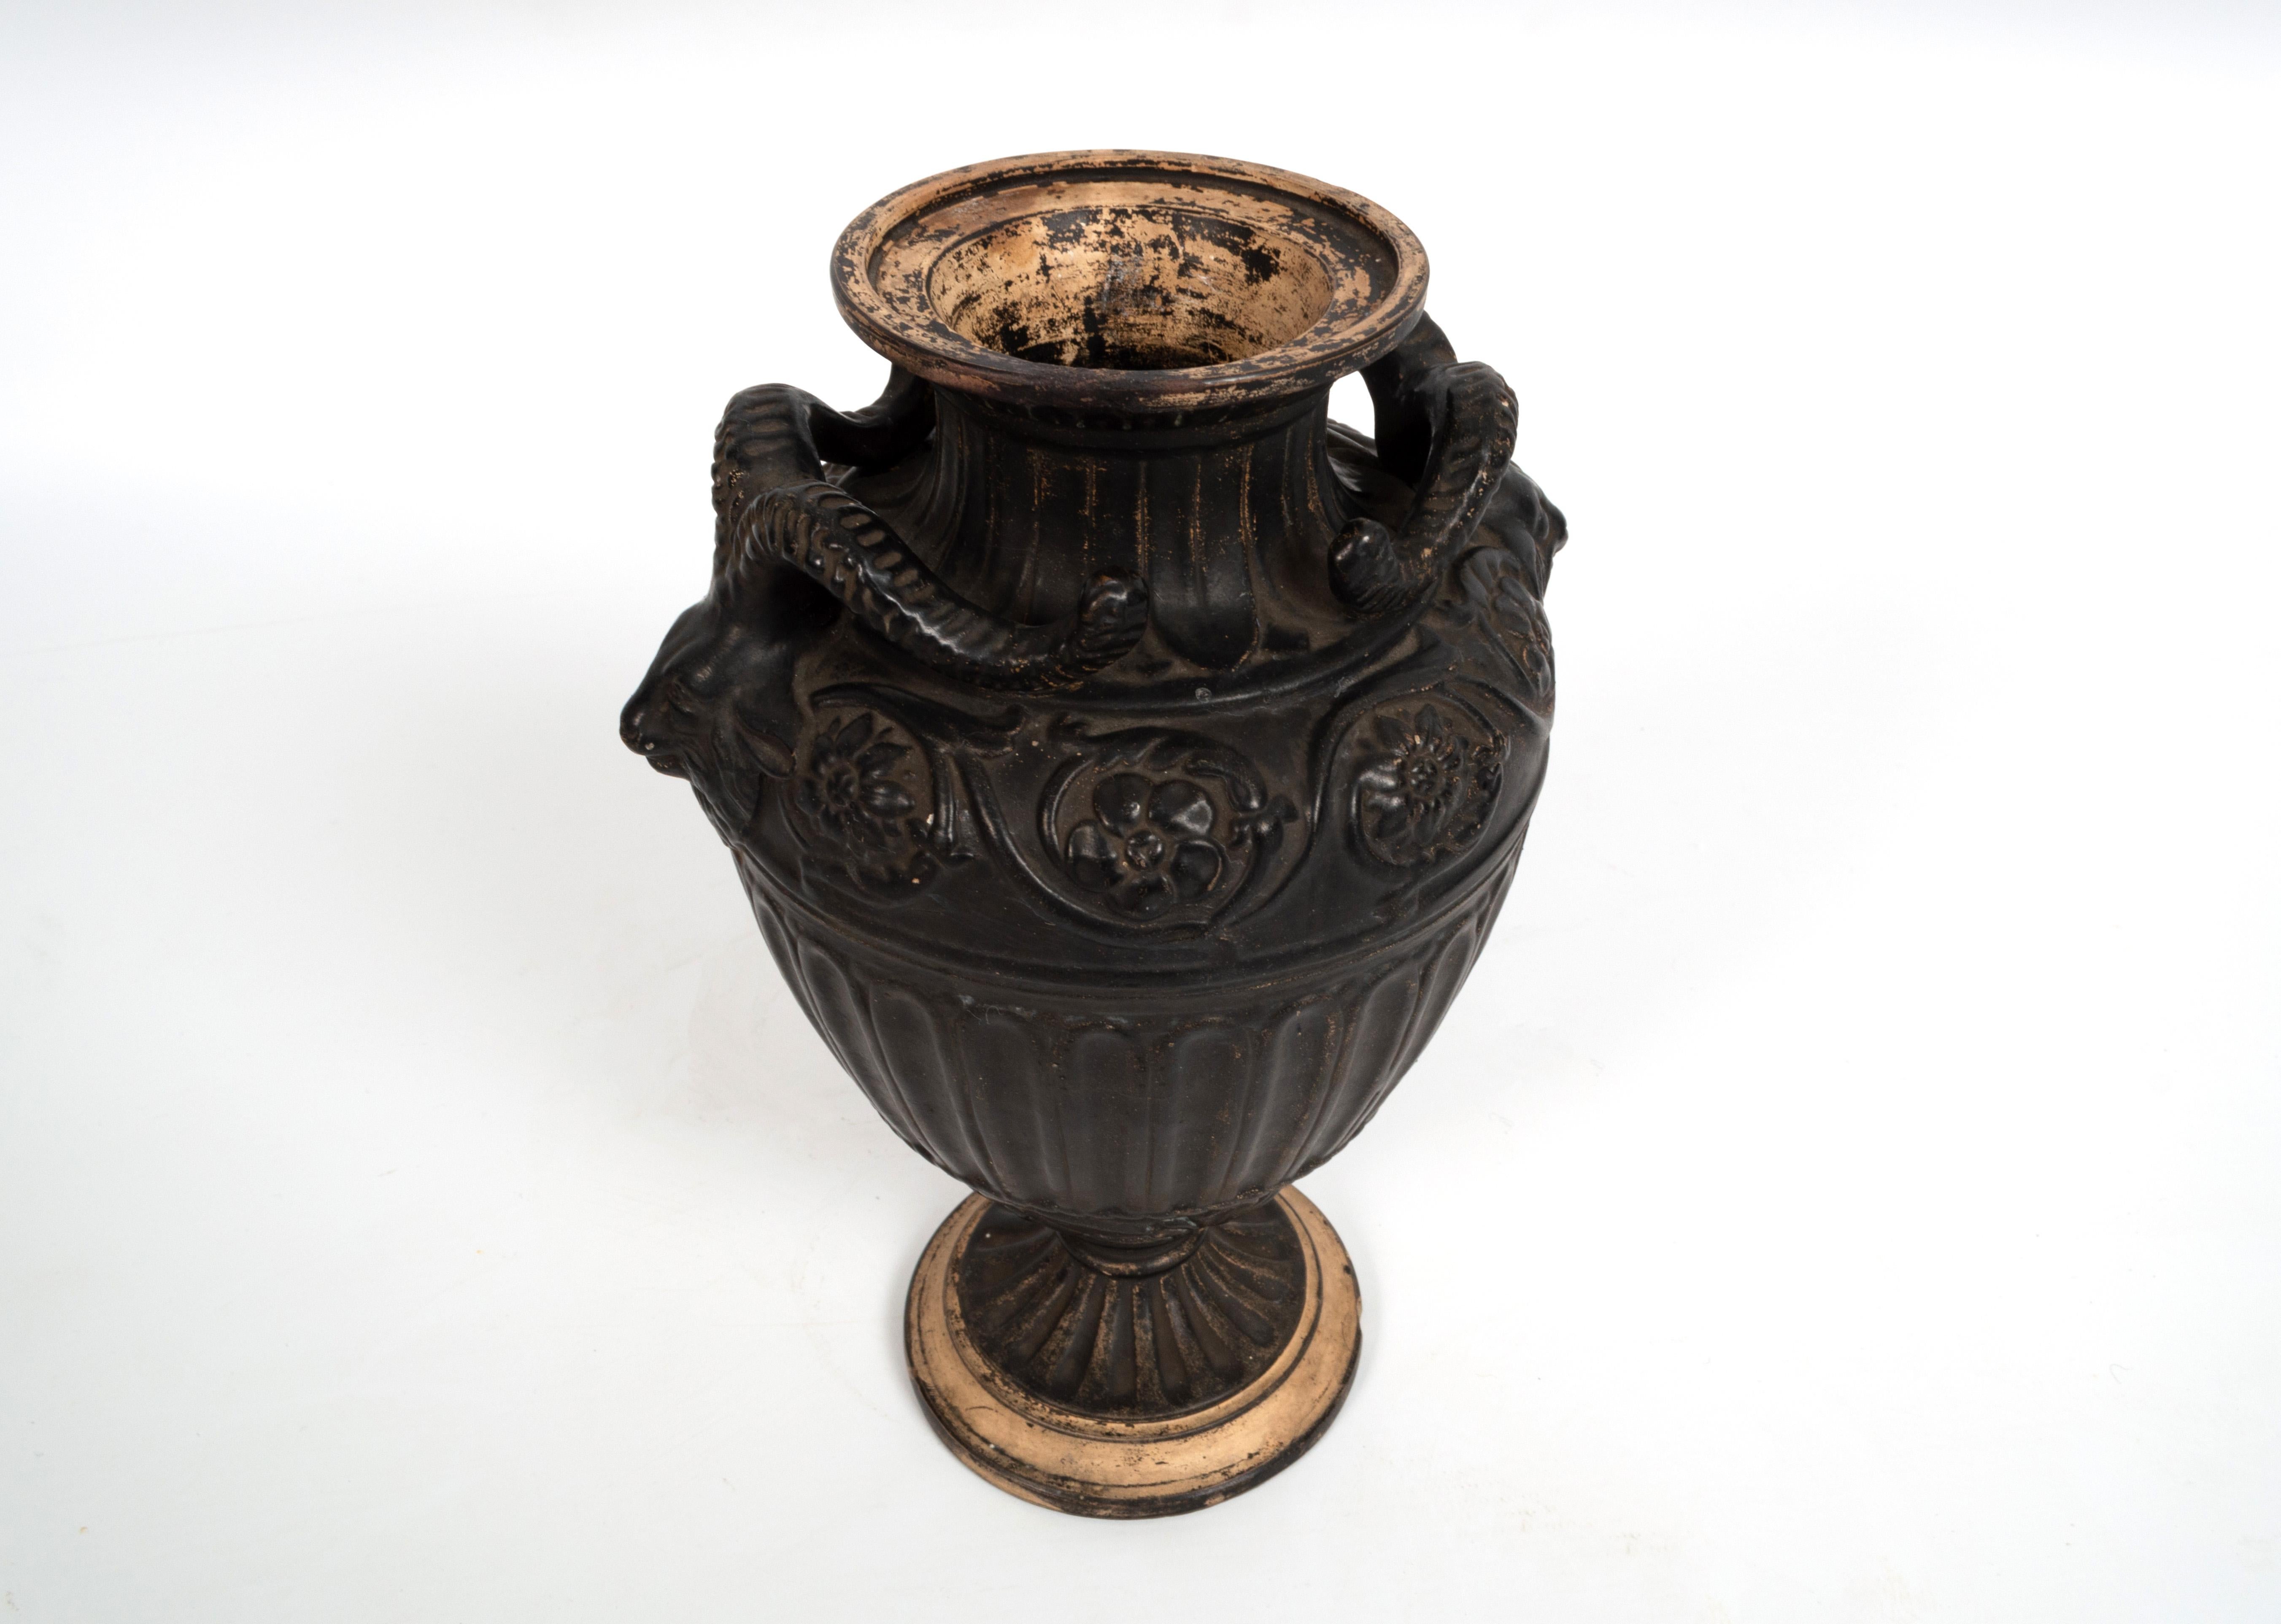 Antique 19th Century Neoclassical Vase By Gerbing & Stephan, Germany, 1892 For Sale 2